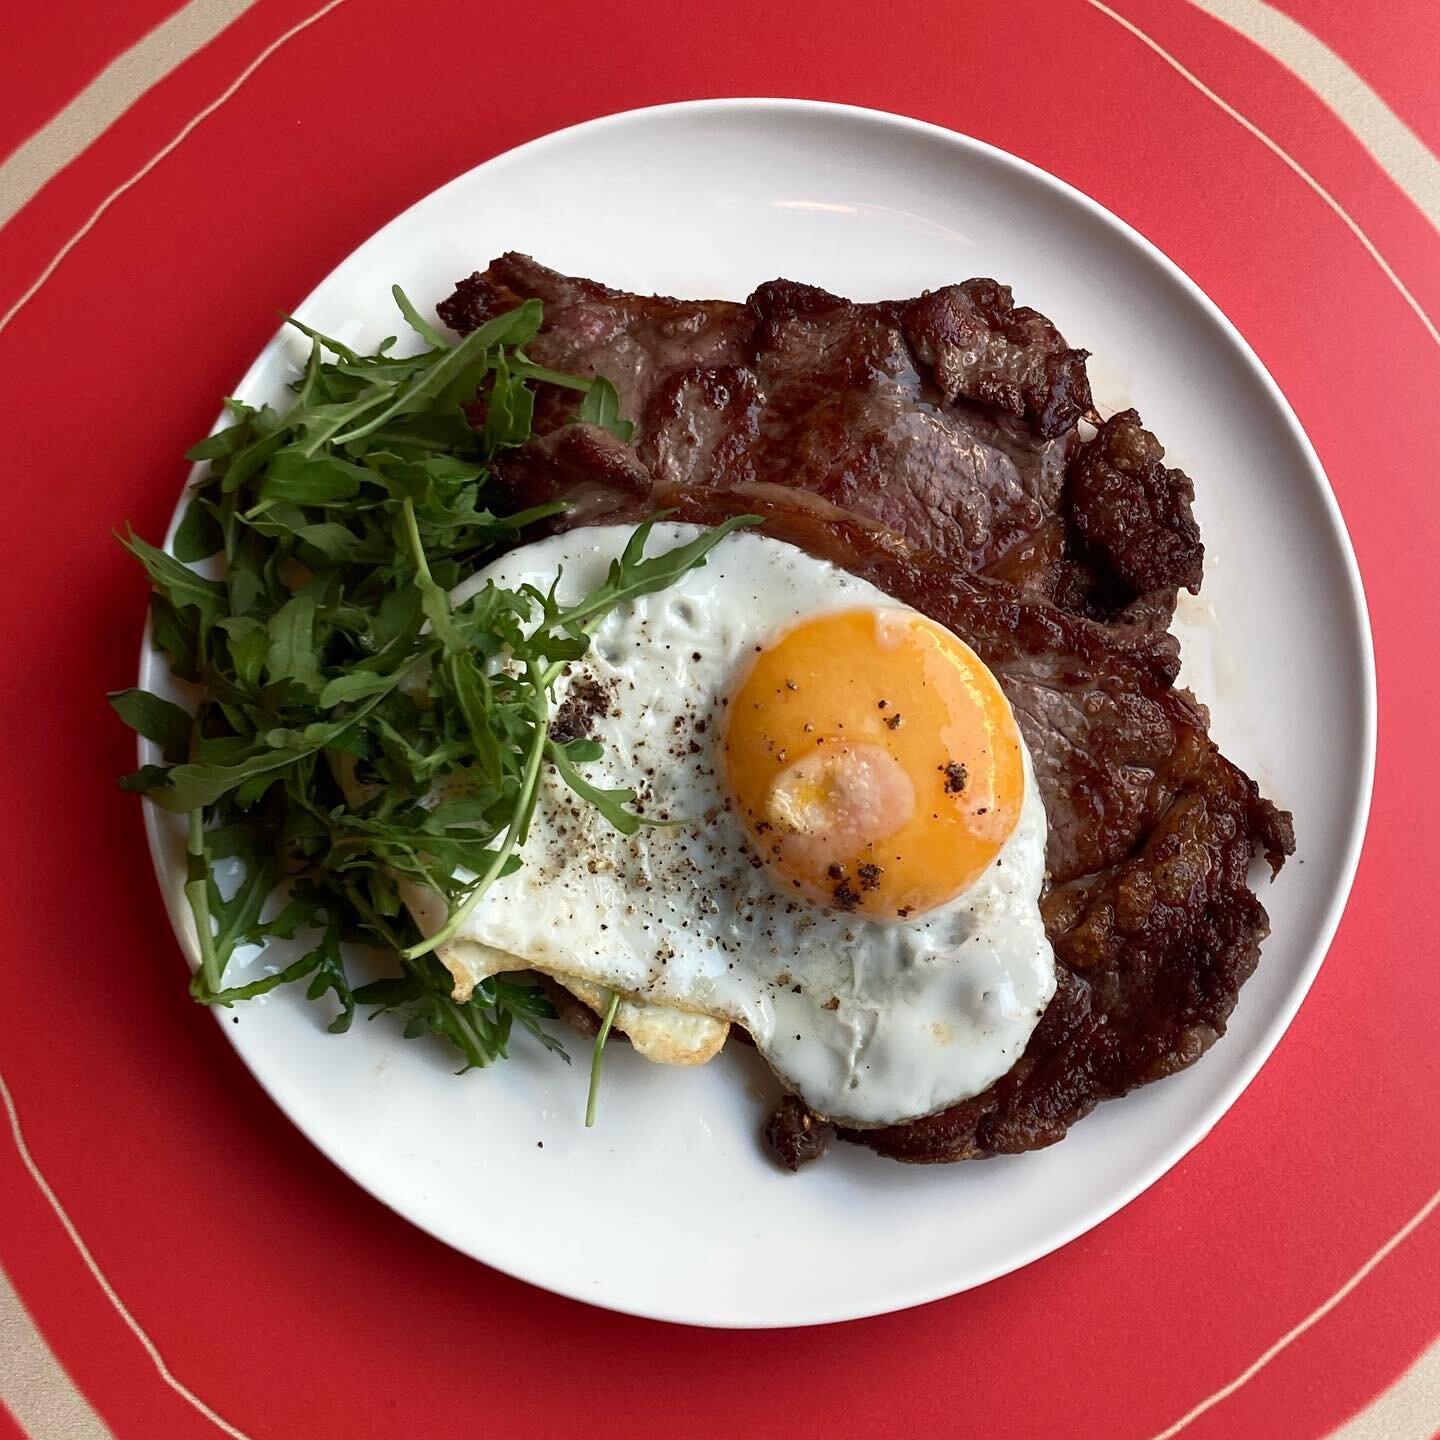 Steak and Eggs, Baby! Thinly sliced entrec&ocirc;te topped with a classic sunny side up&hellip;only for Shuk Nights ✨

Thursday, Friday and Saturday 19:00-21:30💙

Let&rsquo;s go!!🪩🕺🏼⚡️